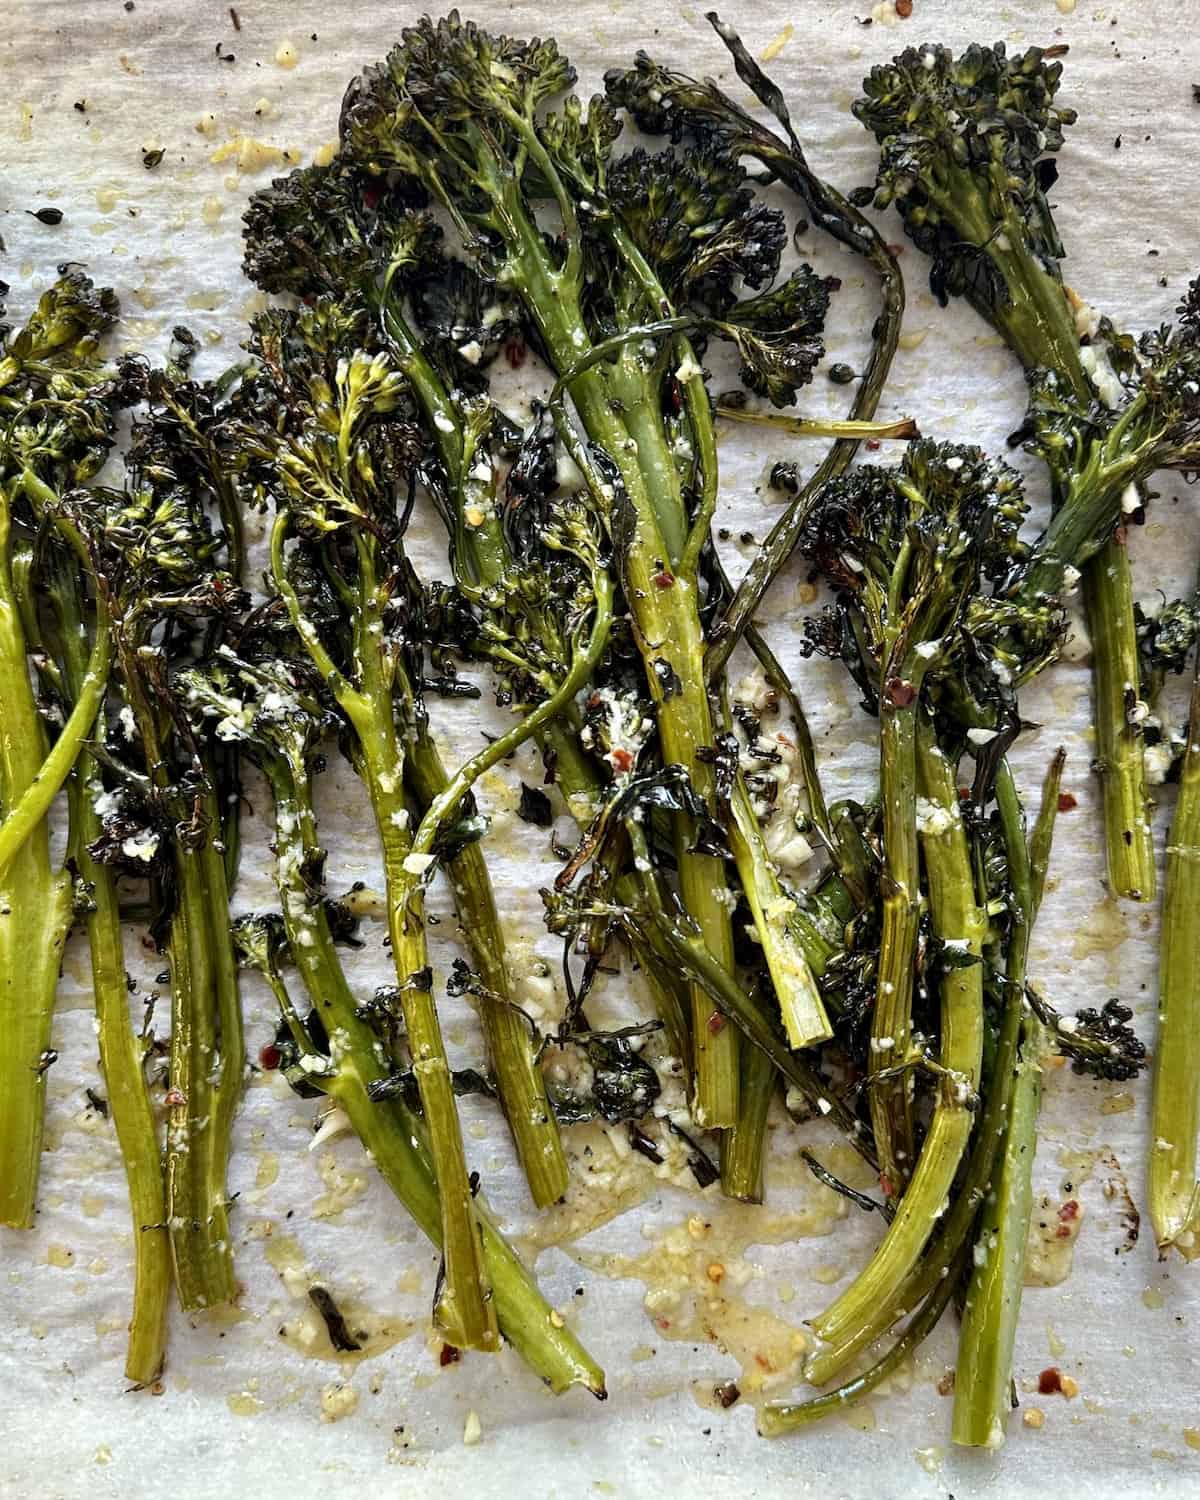 A baking sheet lined with parchment paper with roasted broccolini spread evenly that has been tossed in a dressing with olive oil, minced garlic, red pepper flakes, lemon zest and juice and grated parmesan.